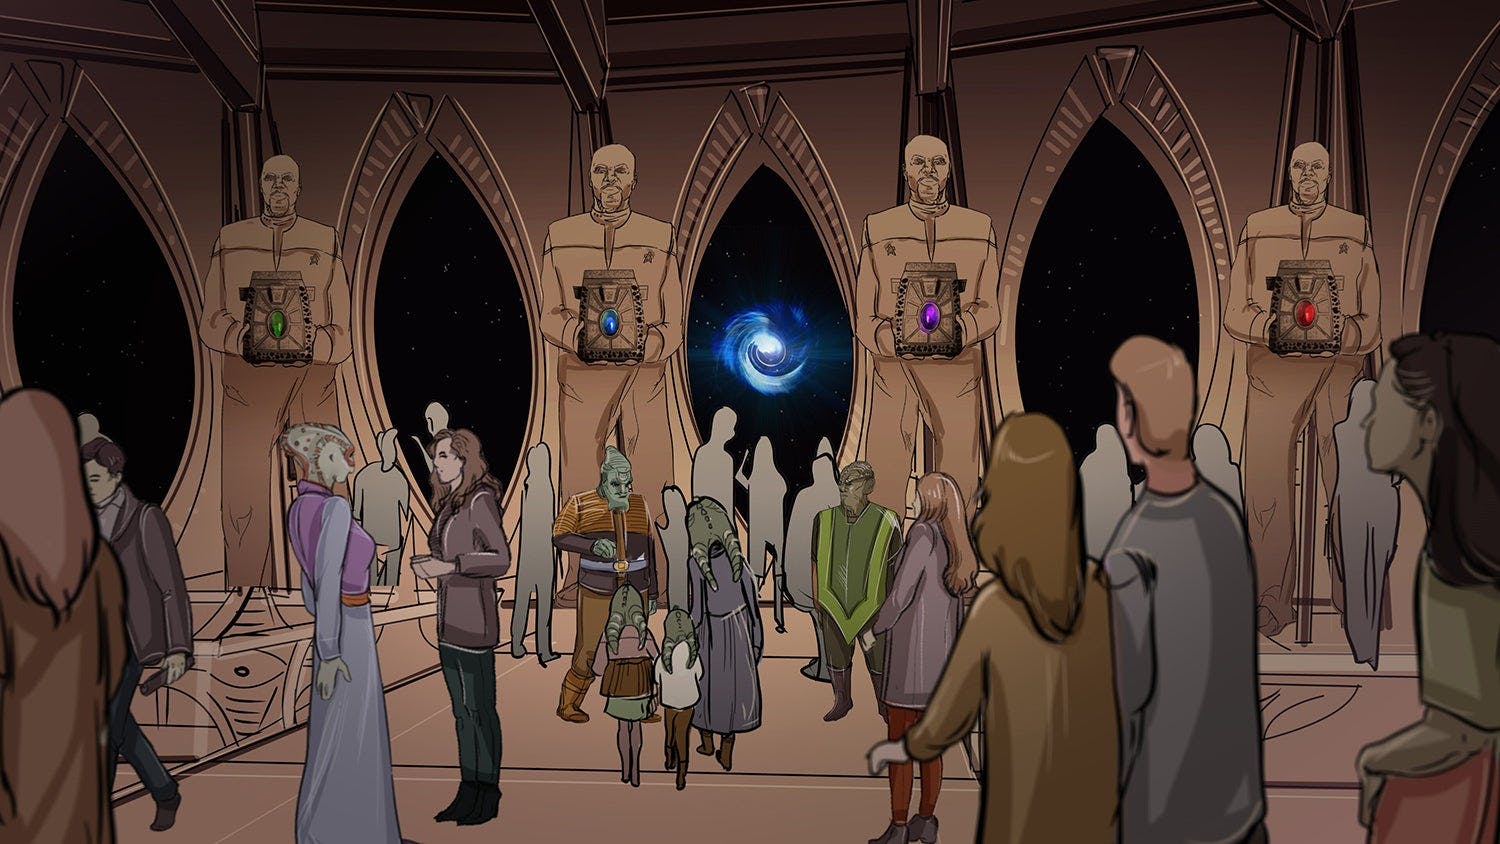 The Deep Space Nine Promenade has some important new design features in this animated sneak peek into the imagined ‘Deep Space Nine’ Season 8 (courtesy of ‘What We Left Behind’)